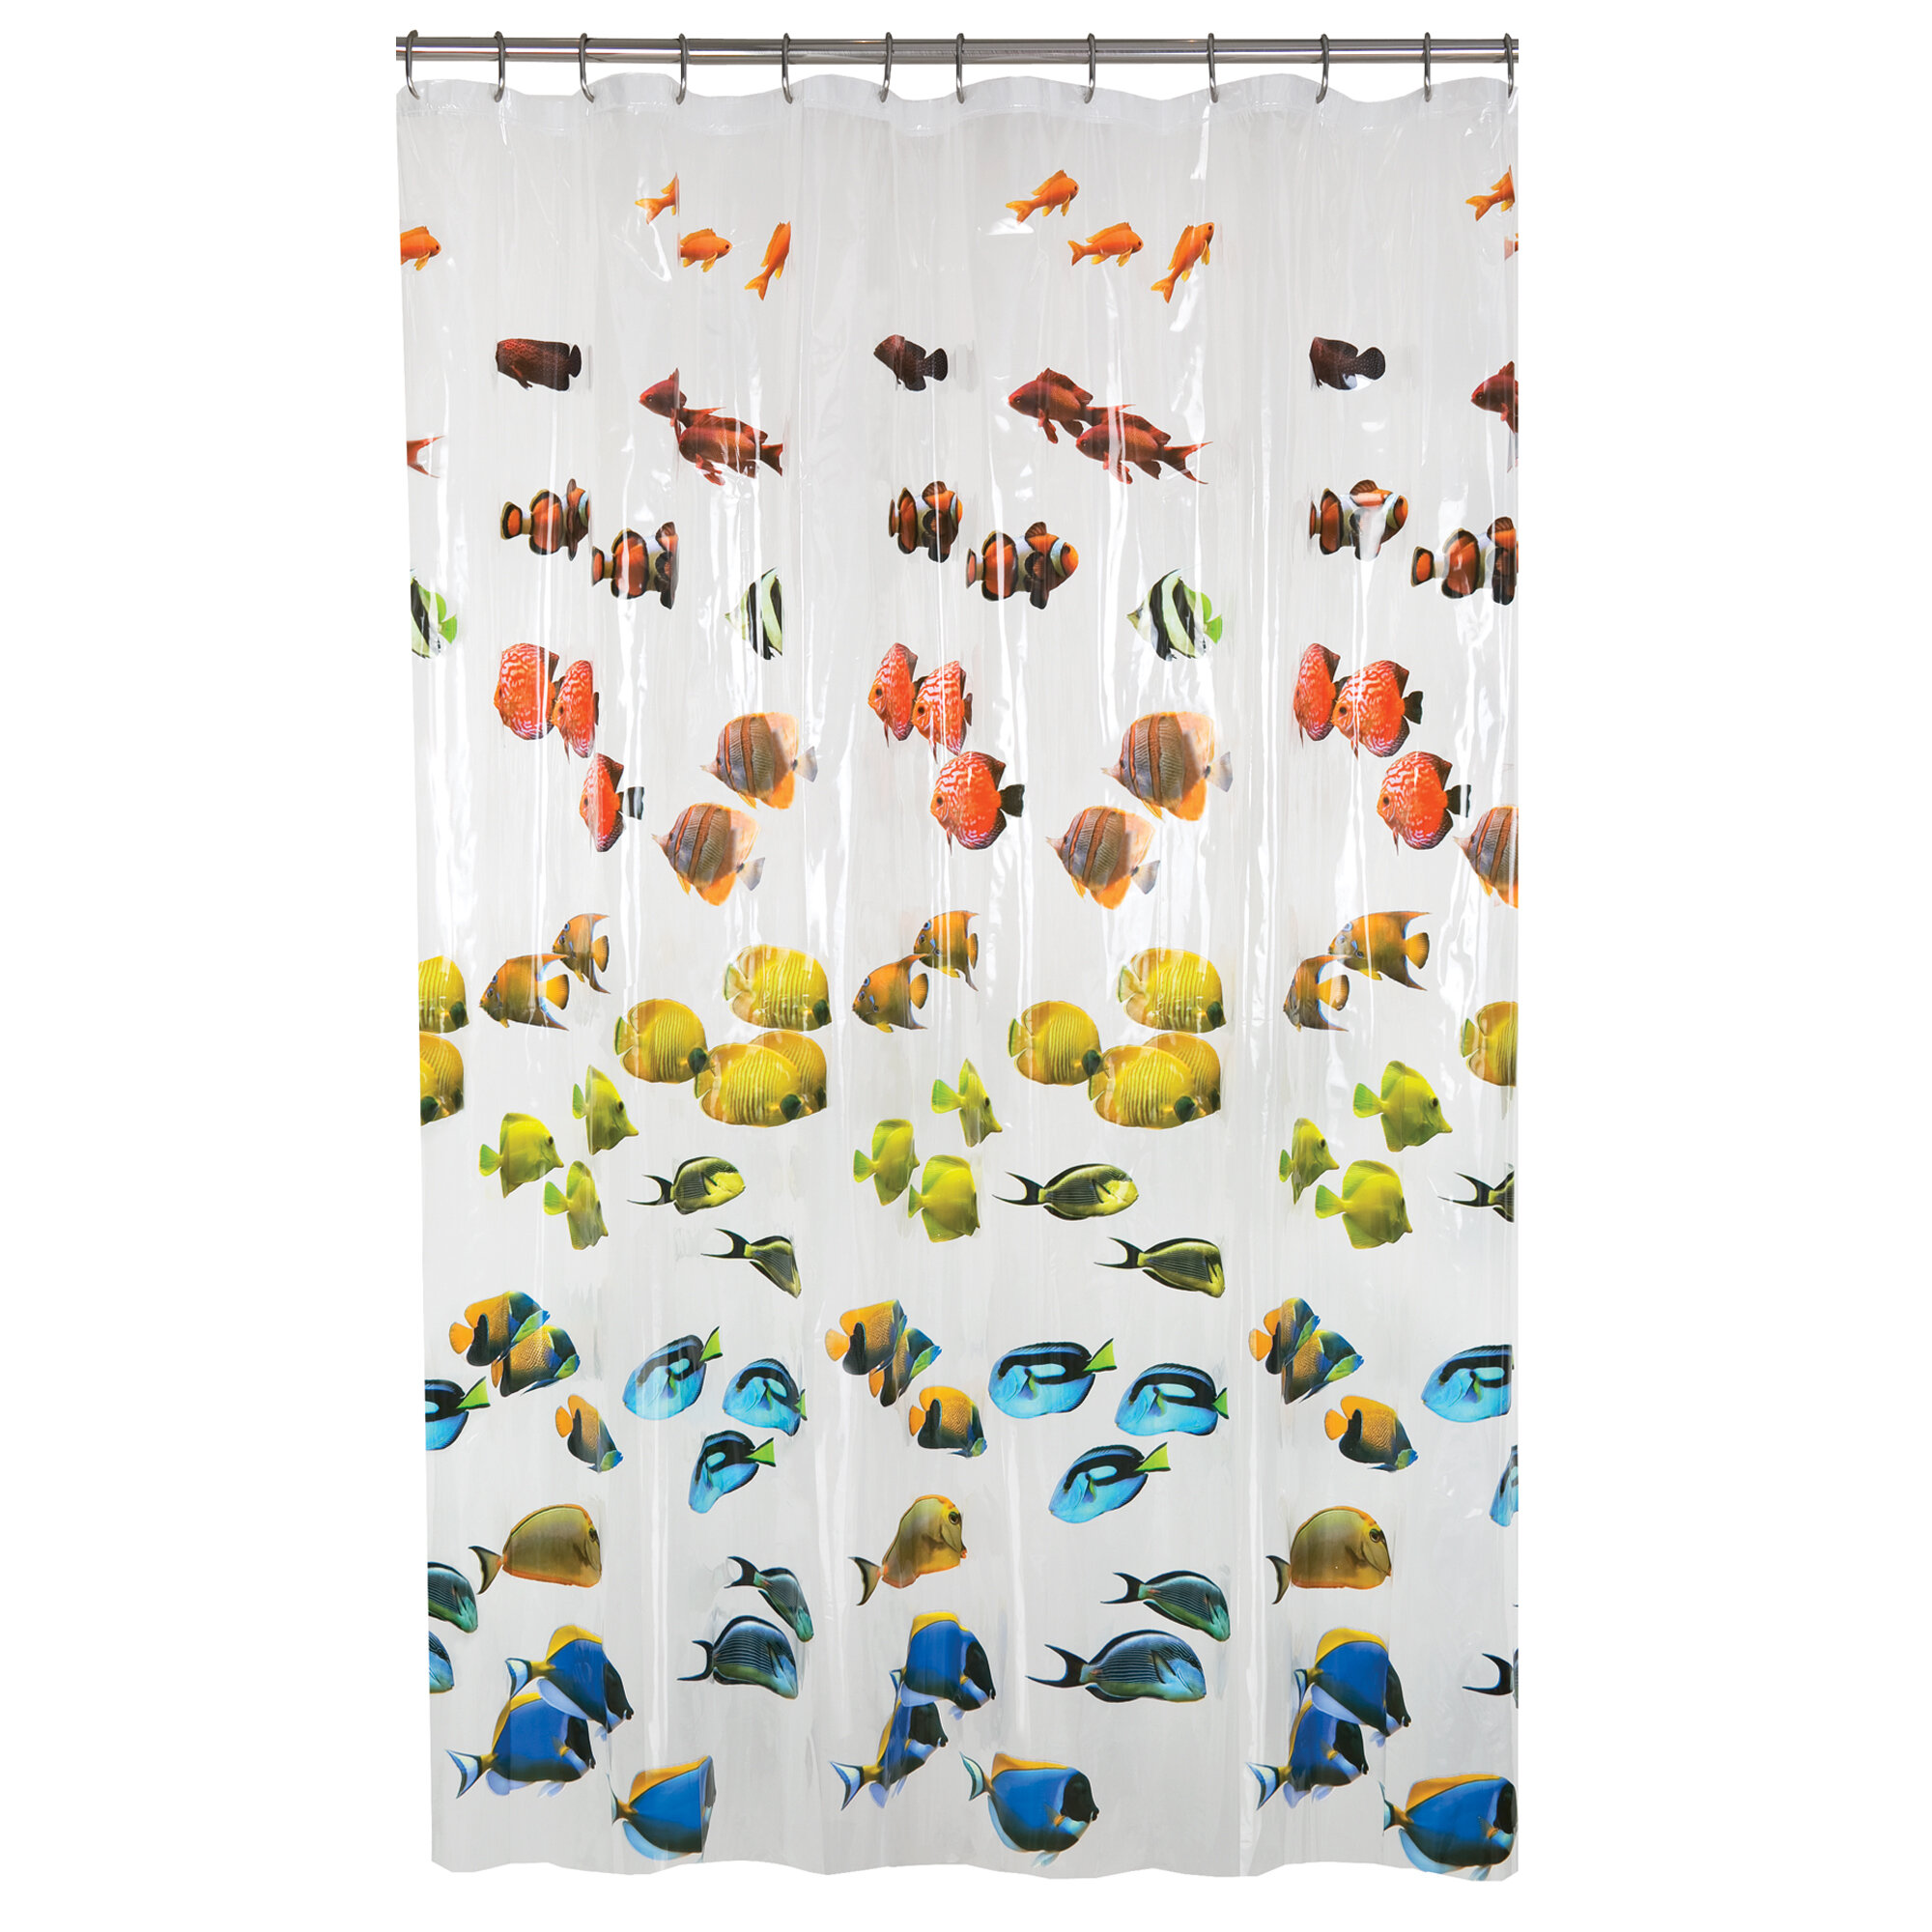 new shower curtain